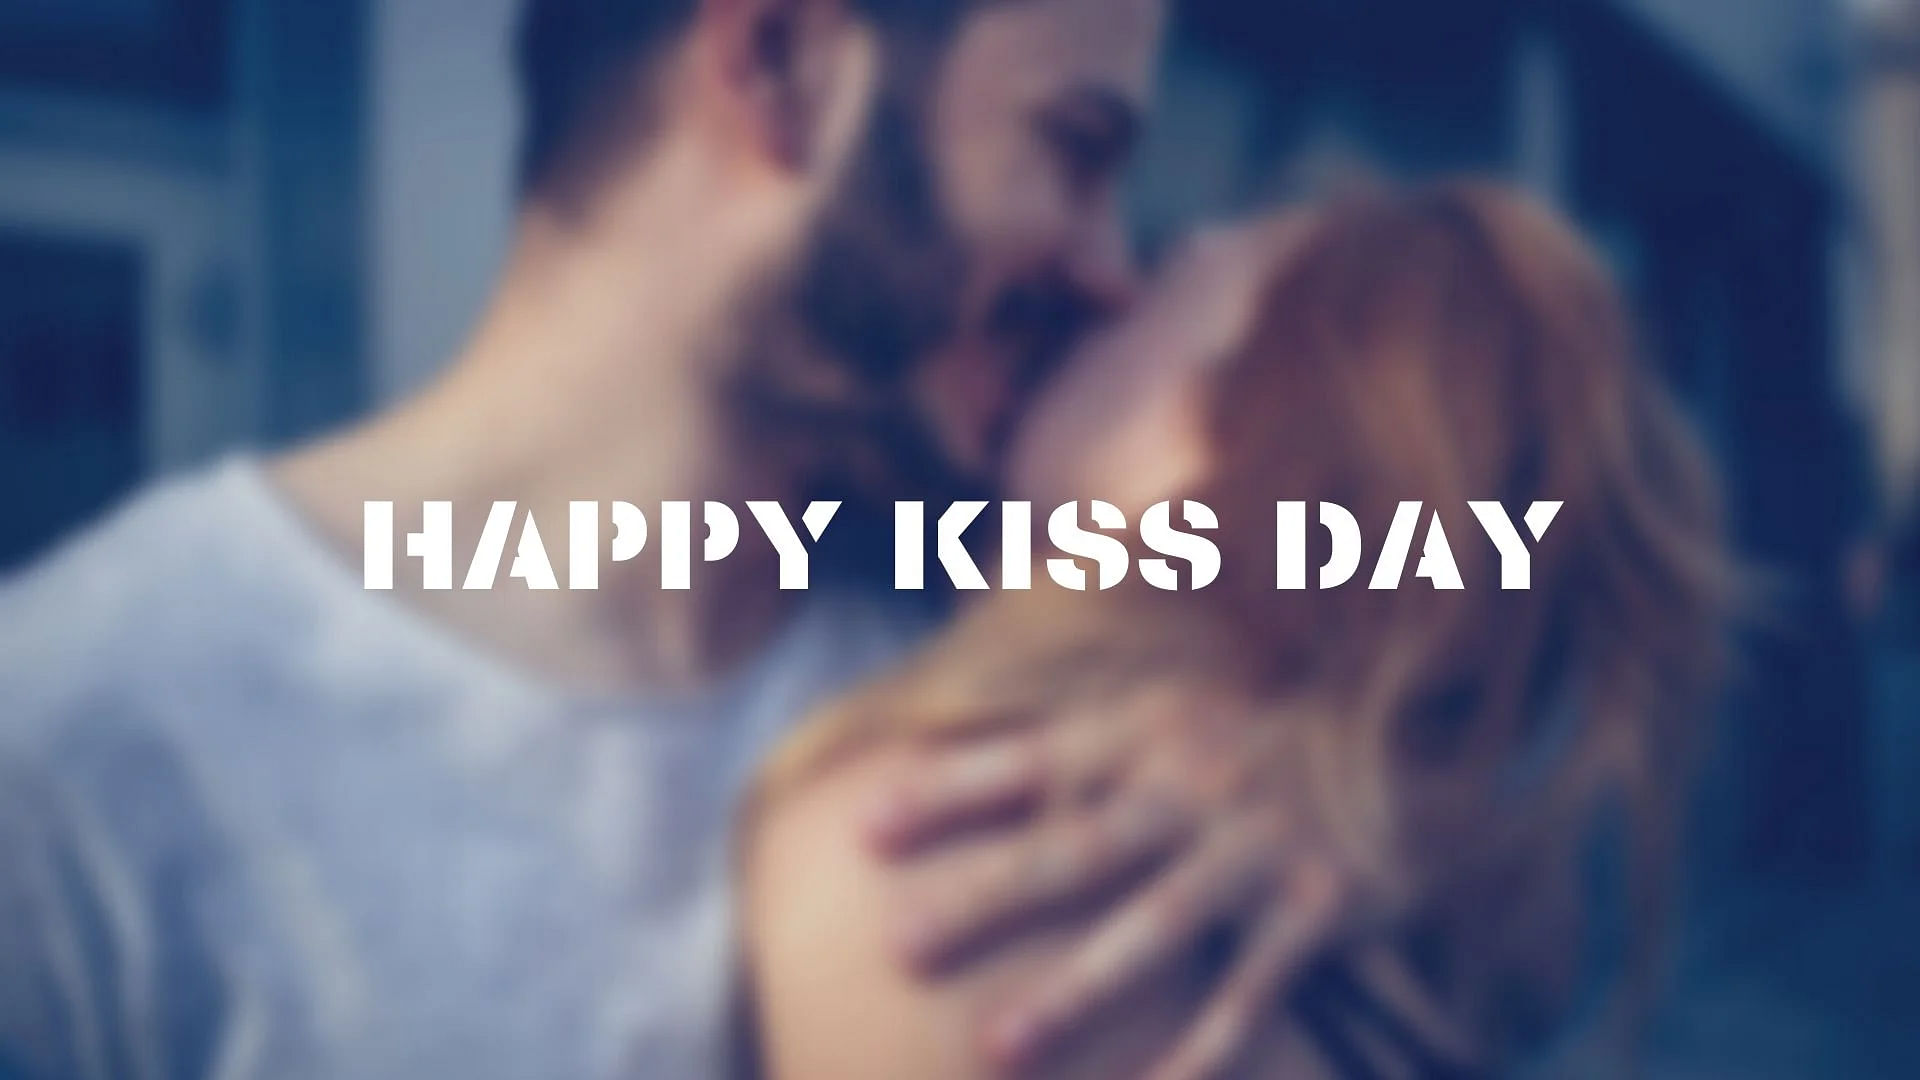 Happy Kiss Day 2020 Wishes, Images, Quotes, Status, Greetings Card, Messages, Photos, SMS, Pics. It is usually celebrated on 13 February, one day before Valentine’s Day